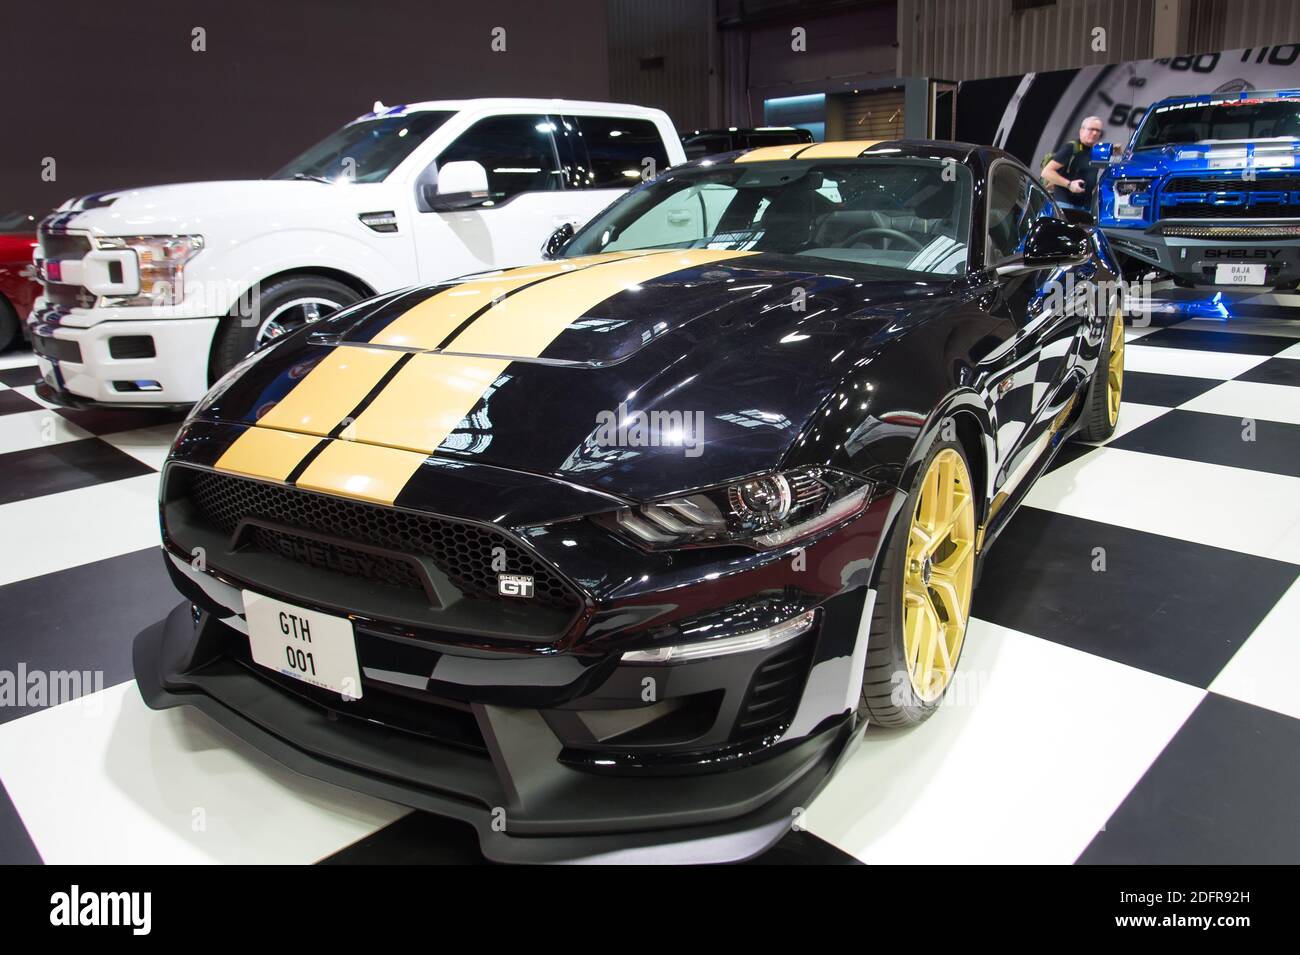 Ford Mustang Shelby GT-H during the Paris Motor Show 2018, known as Mondial  de l'Automobile held at the Porte de Versailles exhibition centre in Paris,  France on October 2, 2018. Photo by